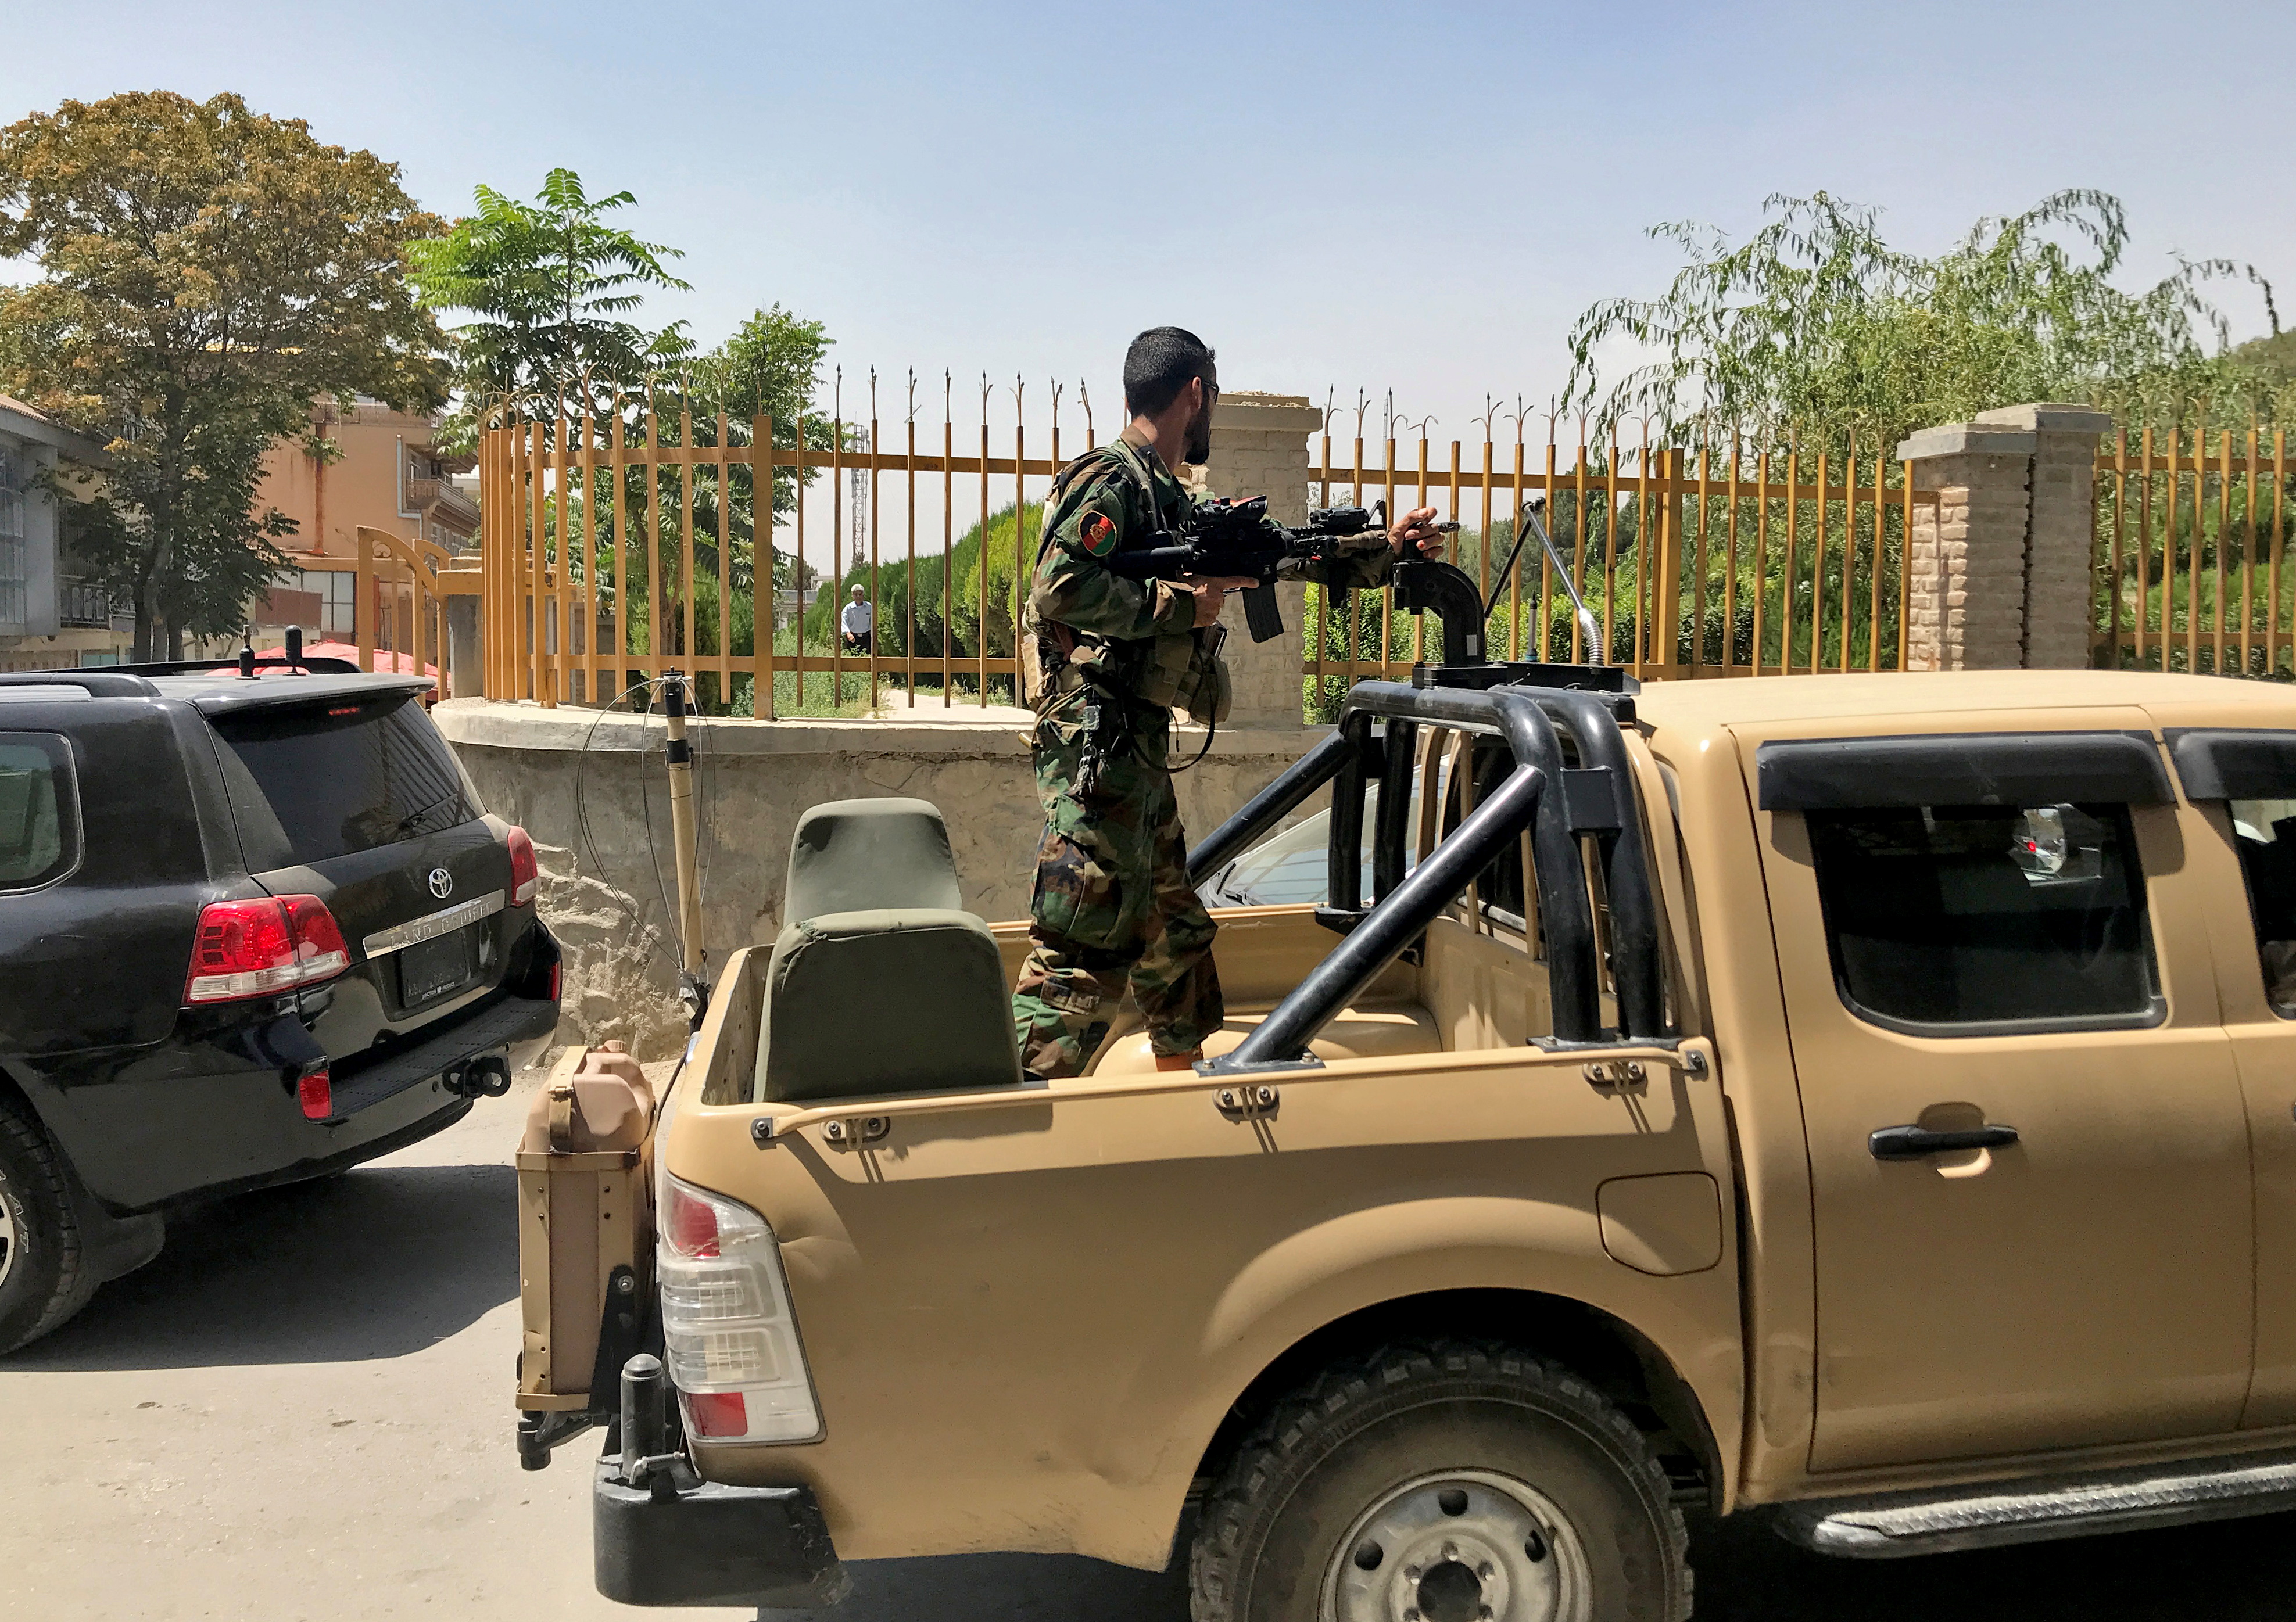 Afghan soldier stands in a military vehicle on a street in Kabul